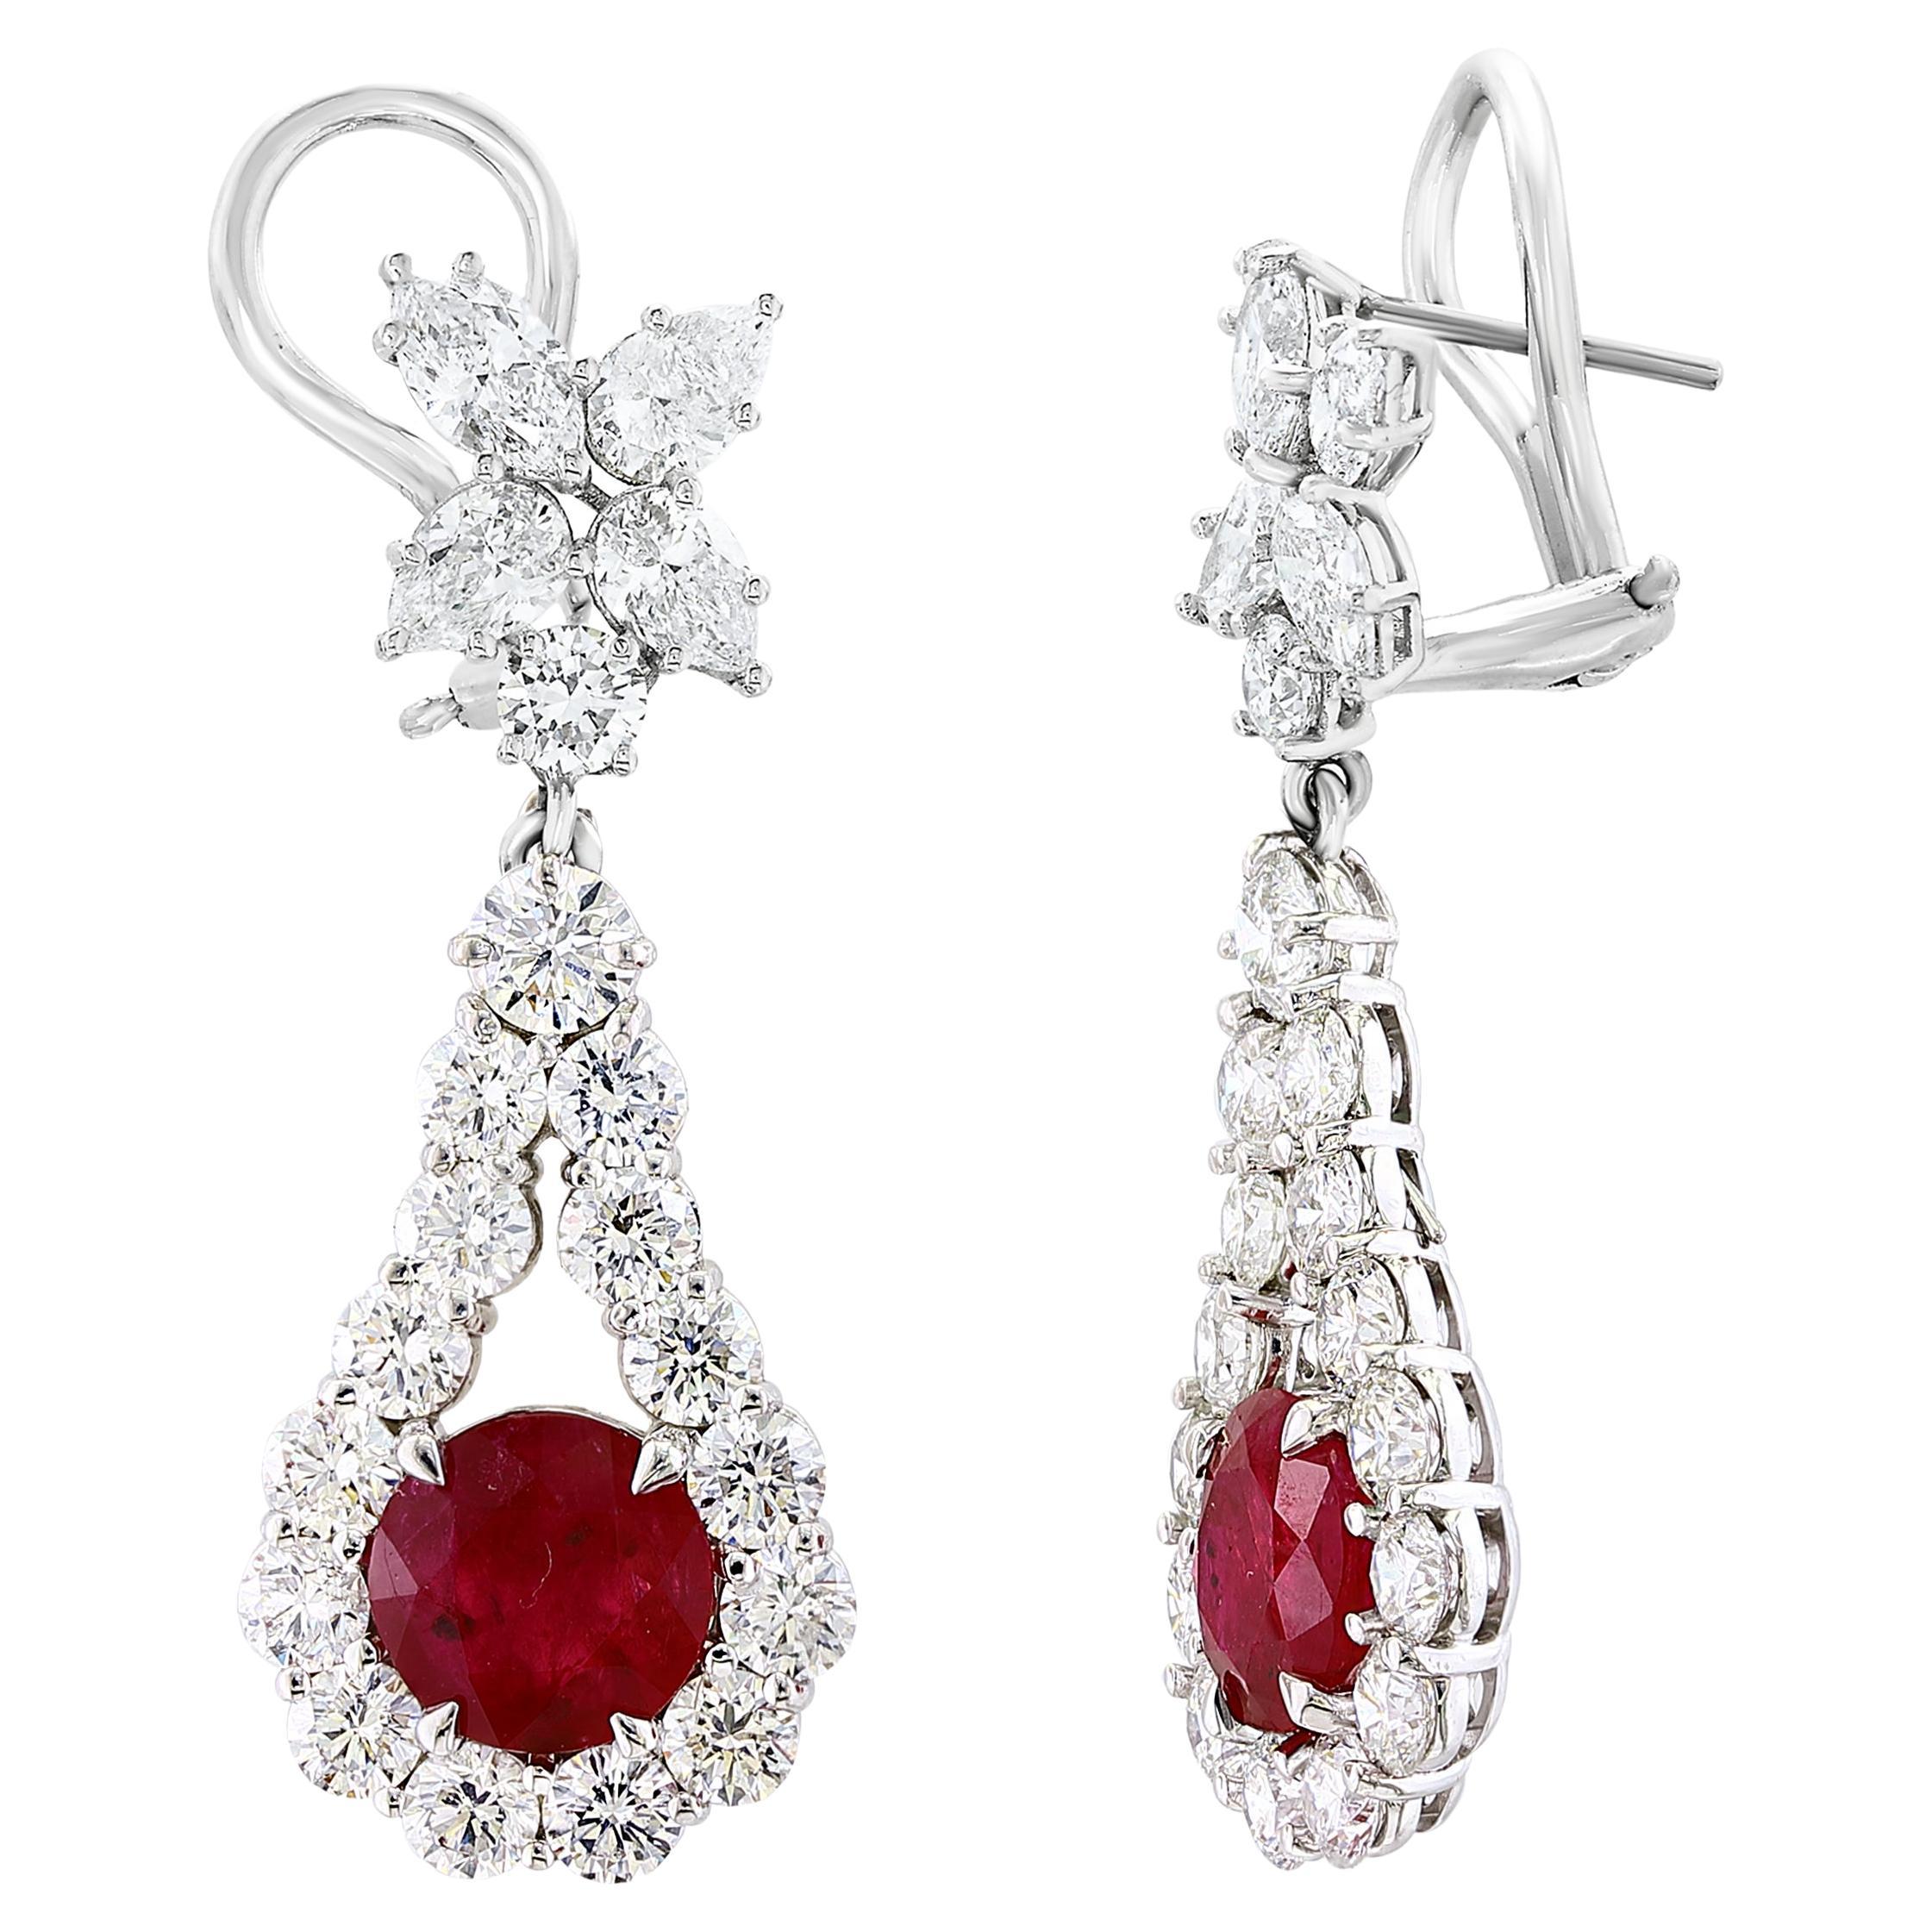 4.20 Carat Round Cut Ruby  and Diamond Drop Earrings in 18K White Gold